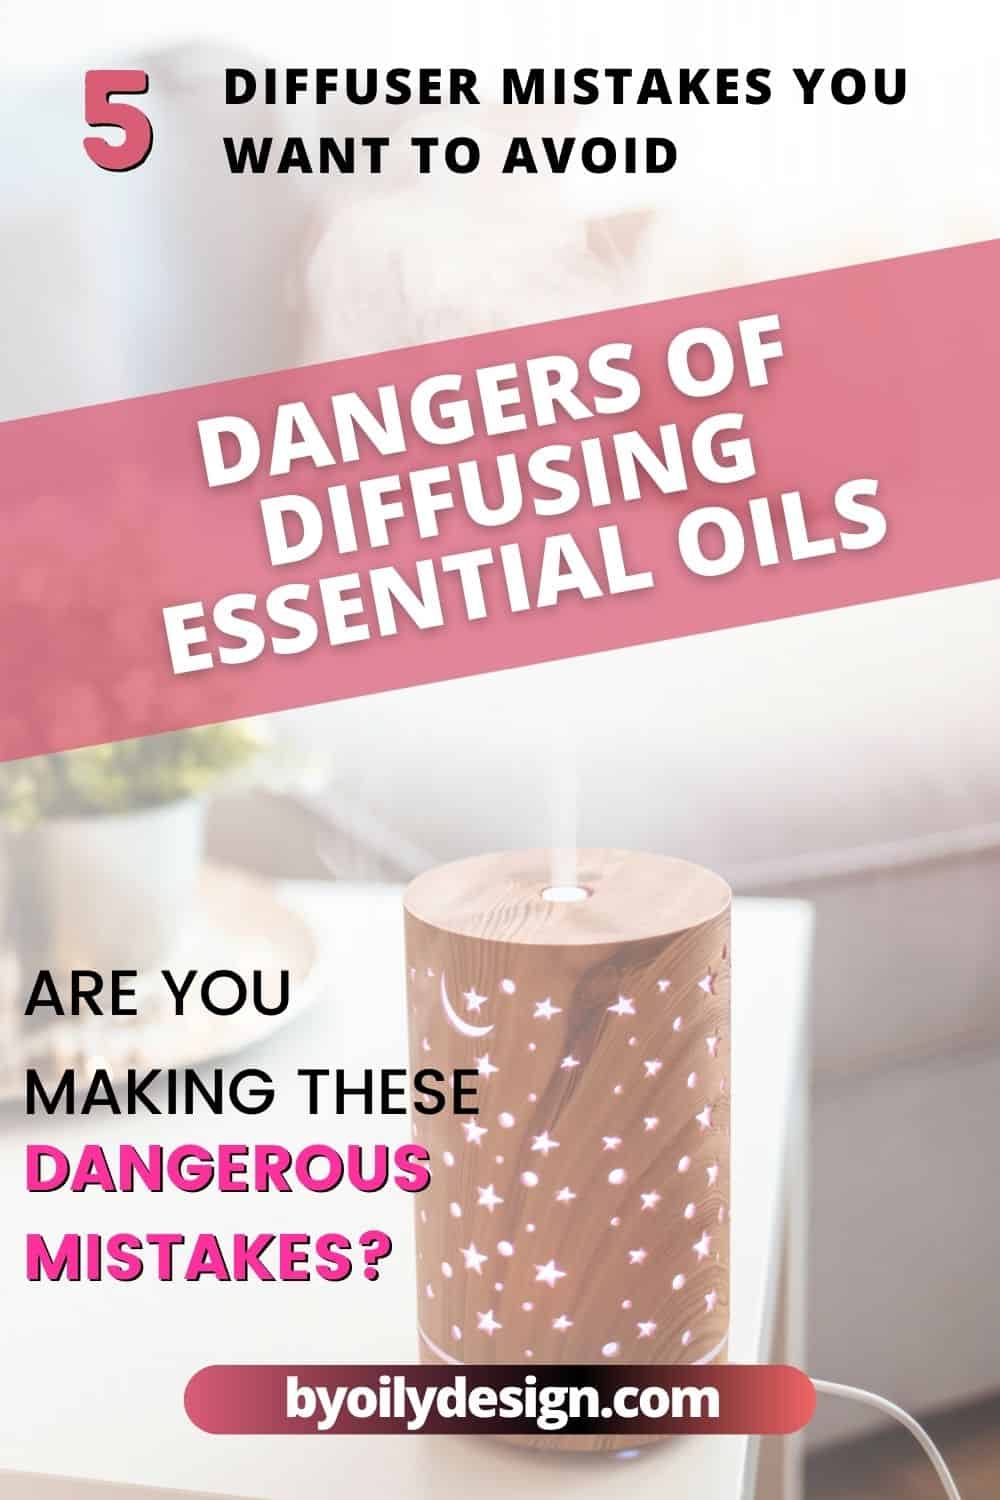 Concerns of Essential oil Safety